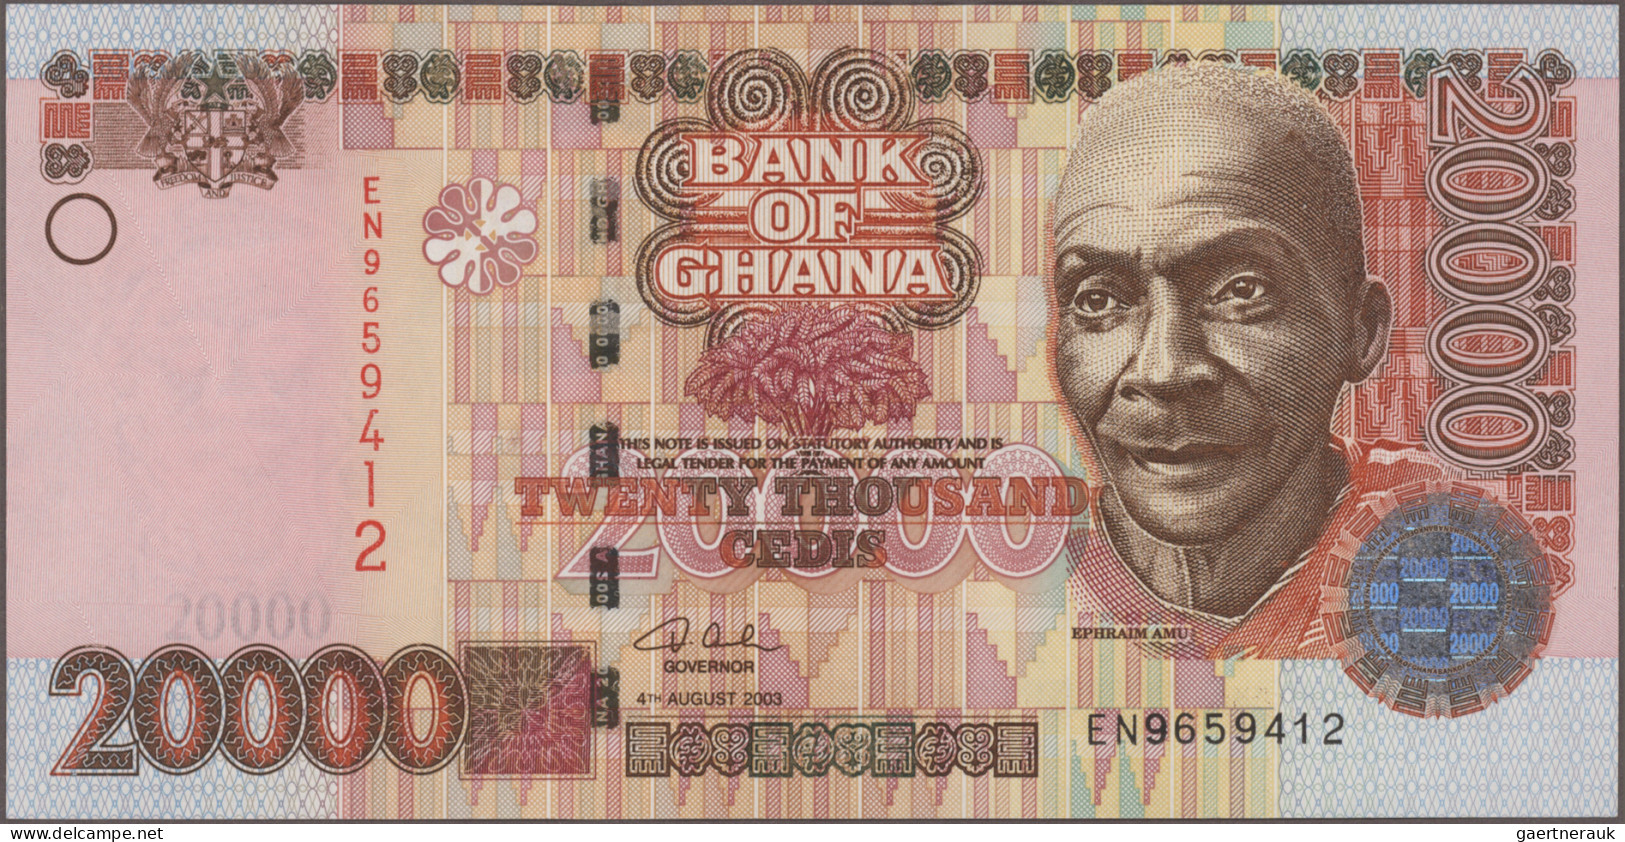 Ghana: Bank of Ghana, huge lot with 43 banknotes, series 1969-2013, comprising f